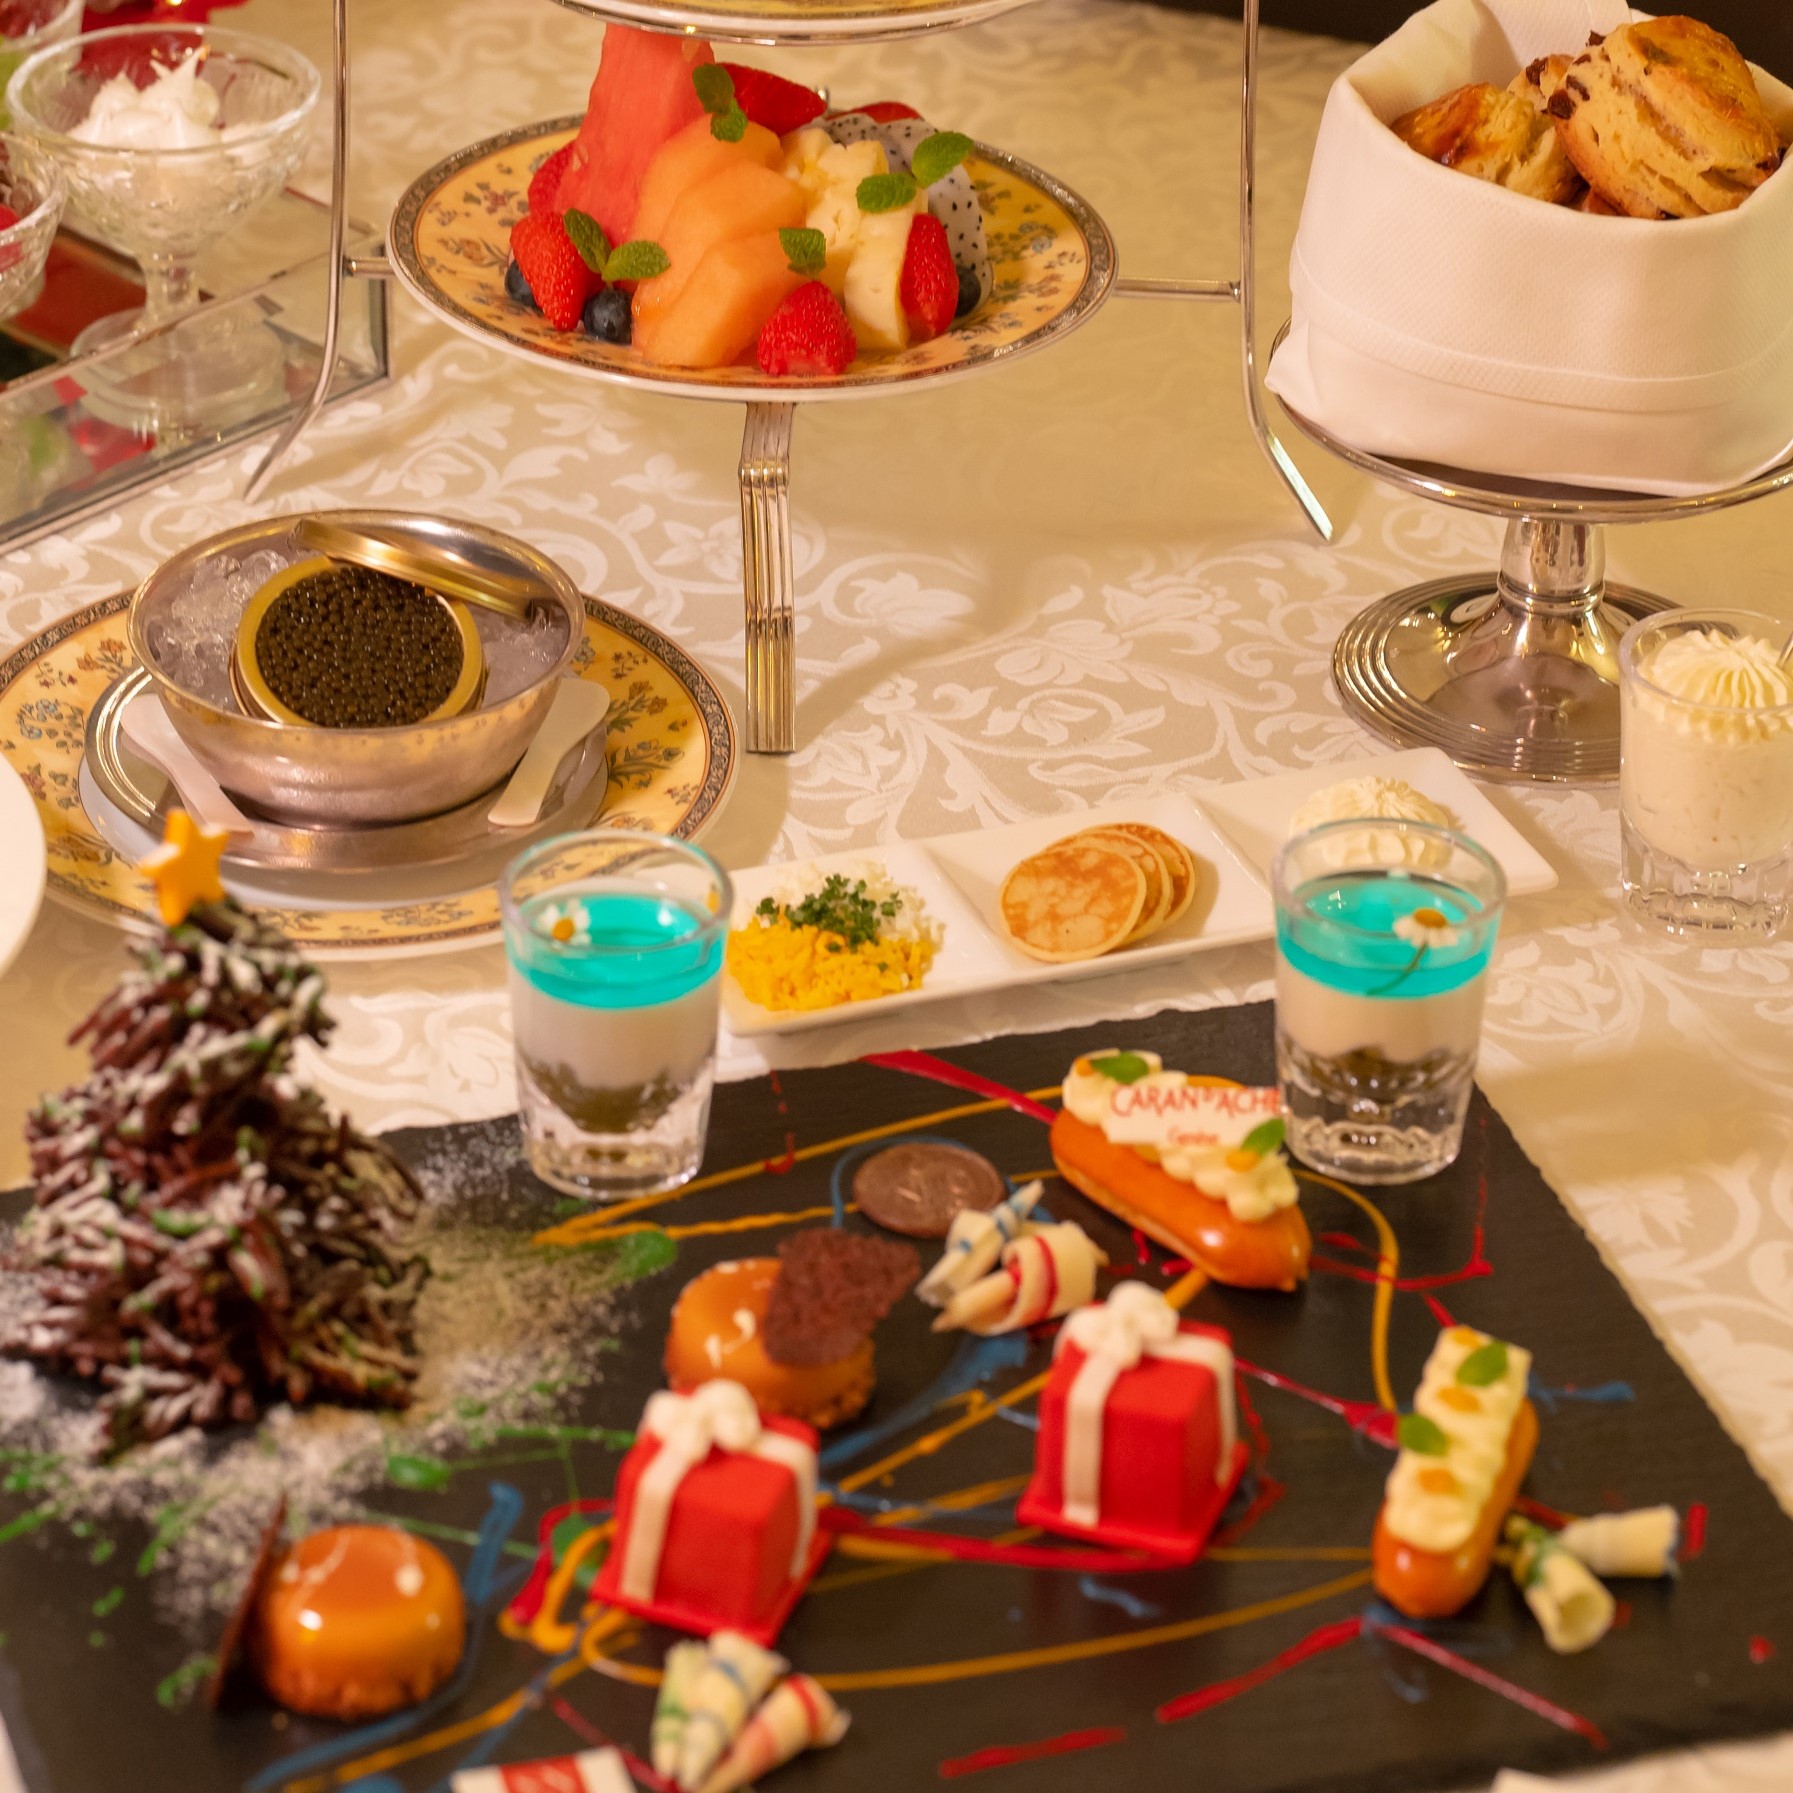 Beijing_Hotel_NUO_Christmas_Afternoon_Tea_Credit_Historic_Hotels_Worldwide_square.JPG